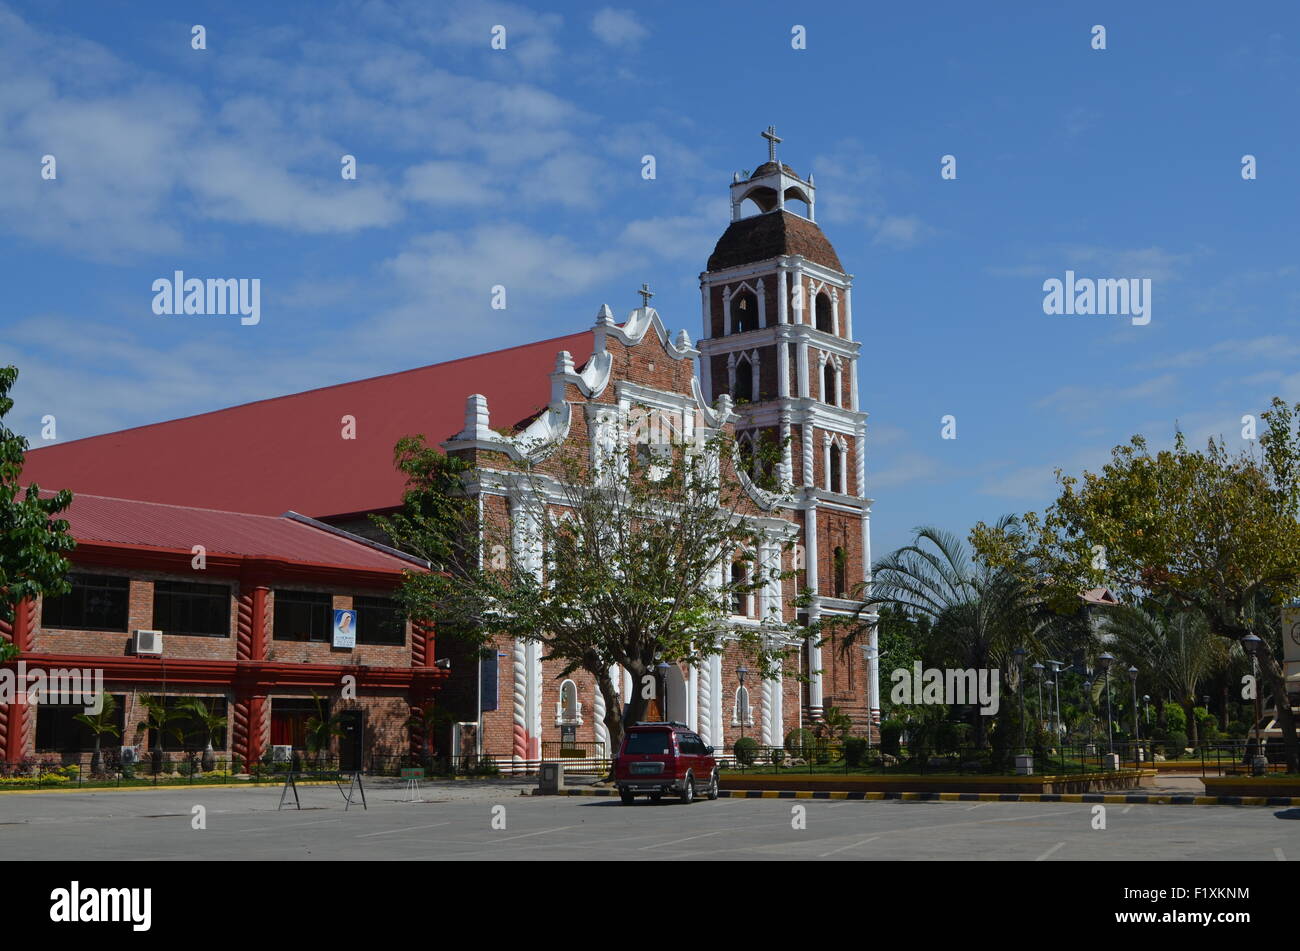 St.:Peters Metropolitan Cathedral, or Tuguegarao Cathedral, Cagayan, Philippines, Founded in 1604 by Dominican Friars. Stock Photo